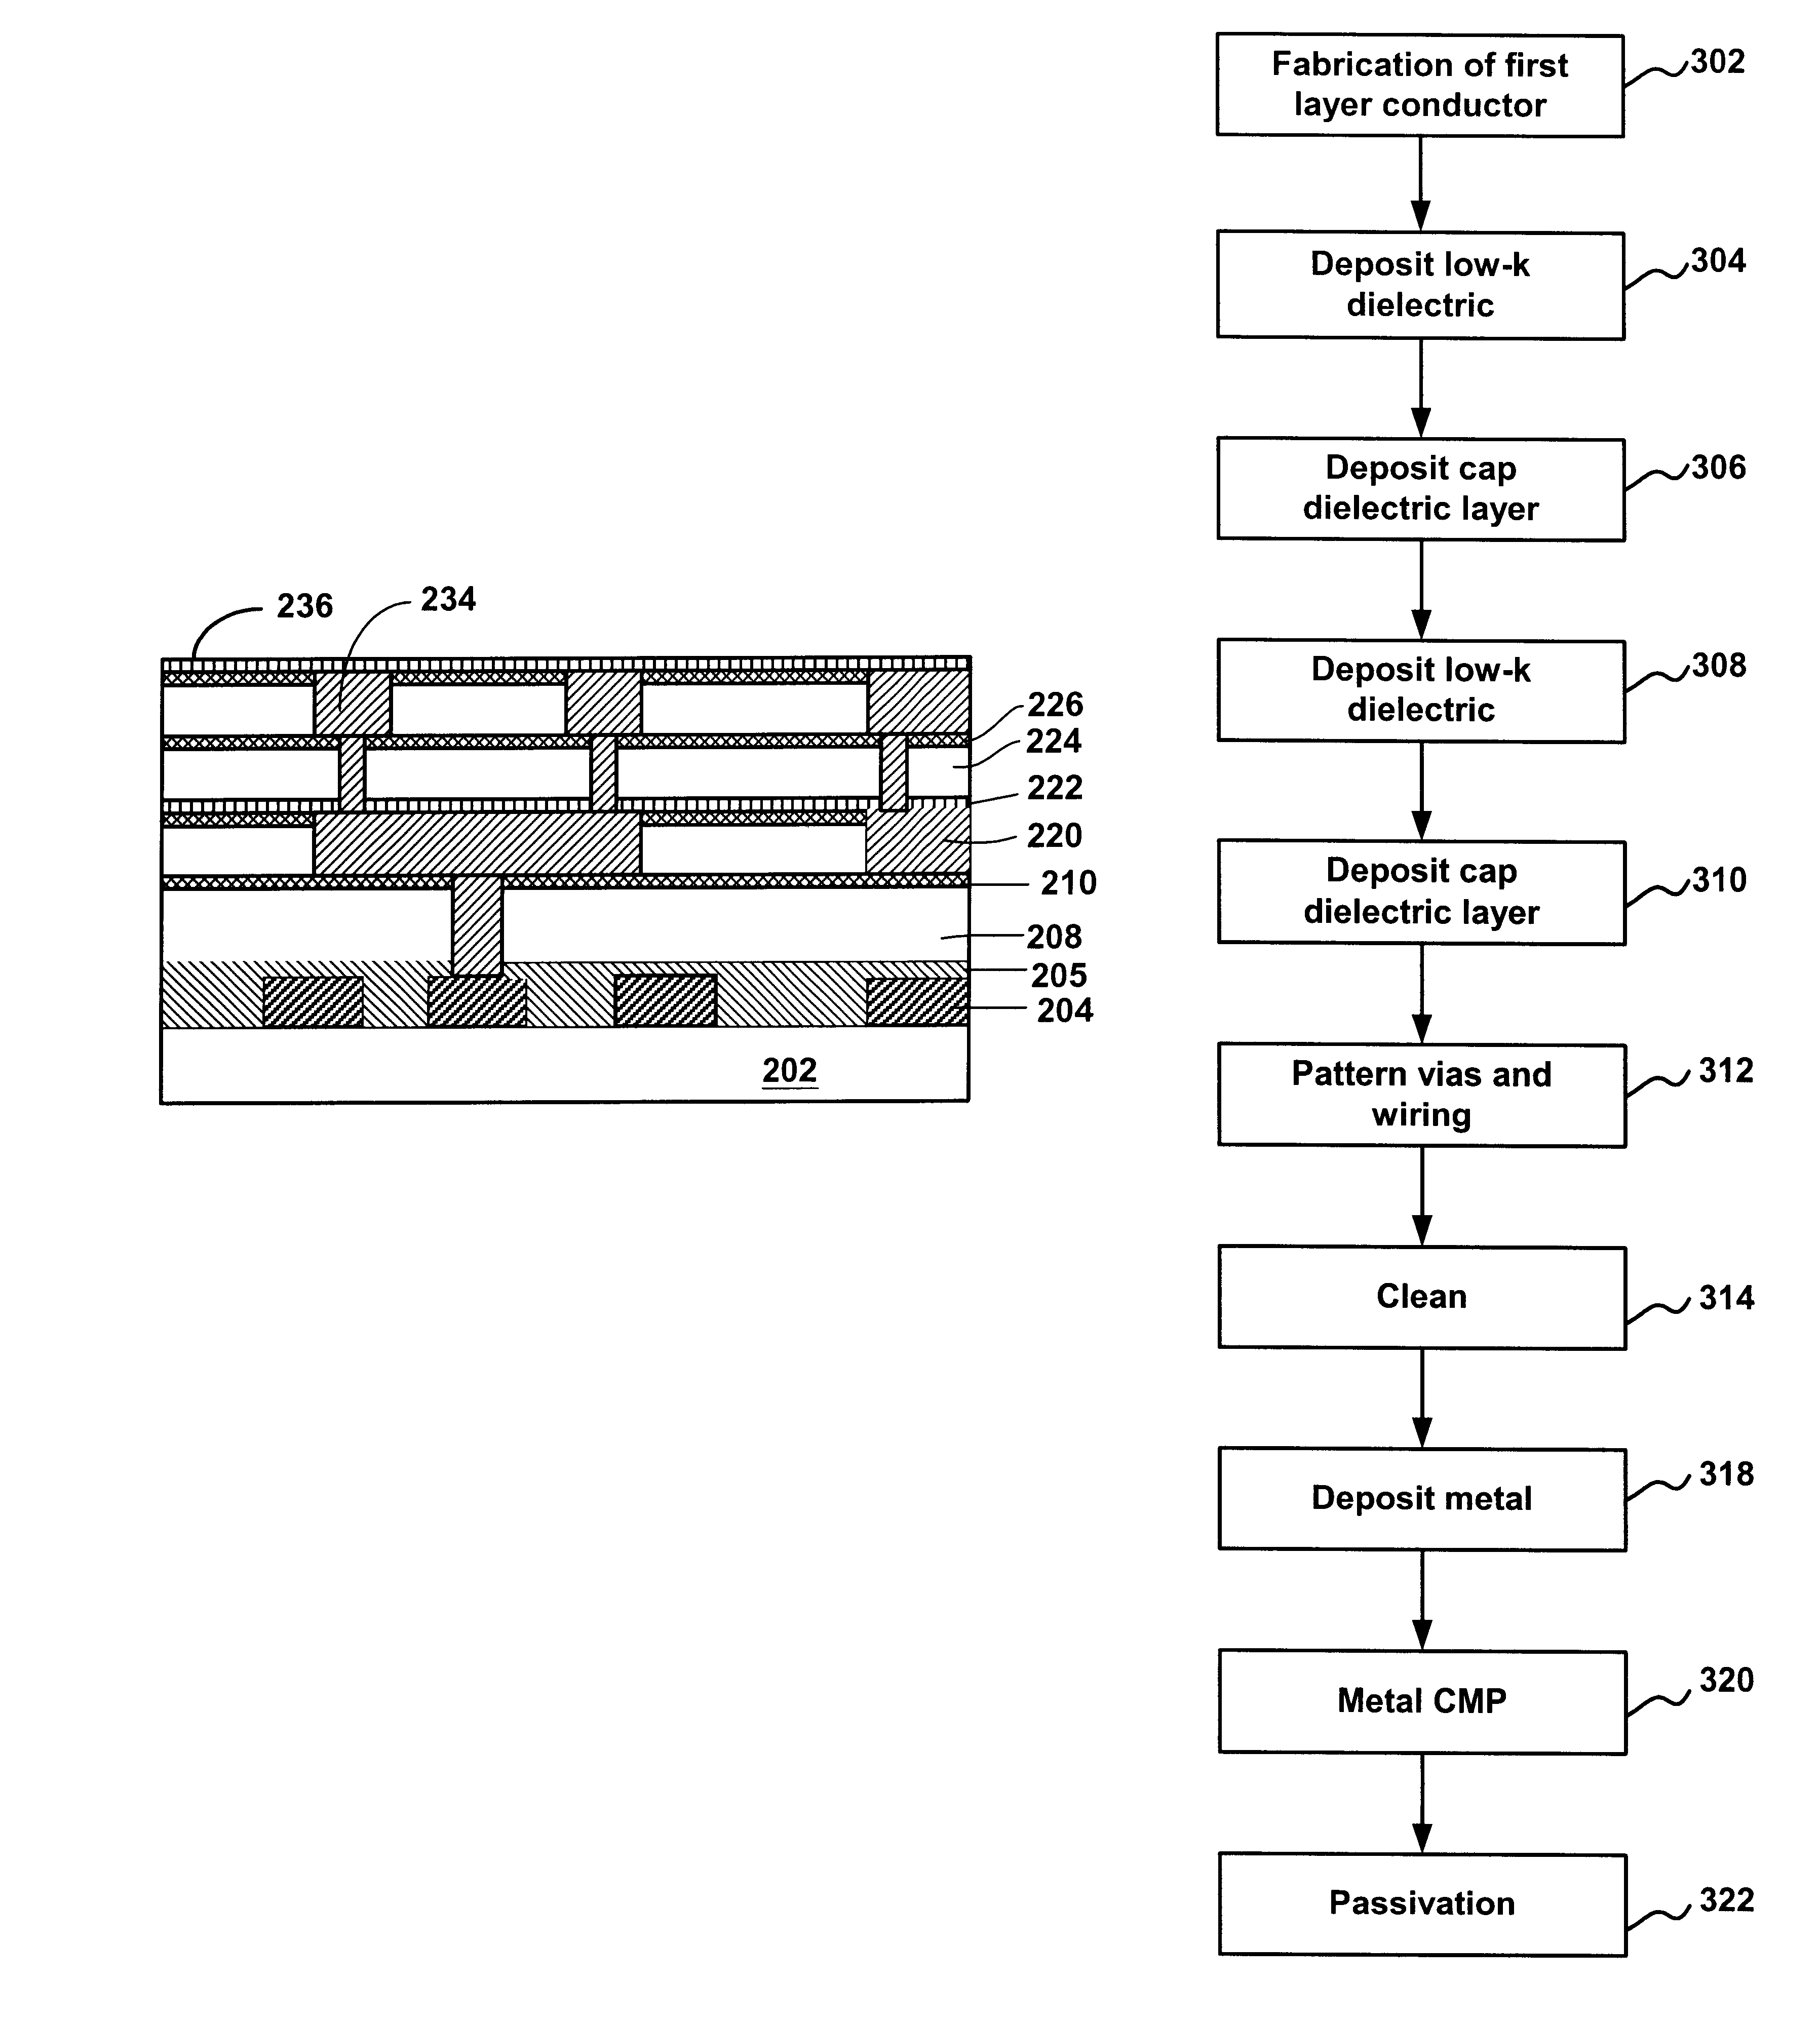 Method of forming dual-damascene interconnect structures employing low-k dielectric materials